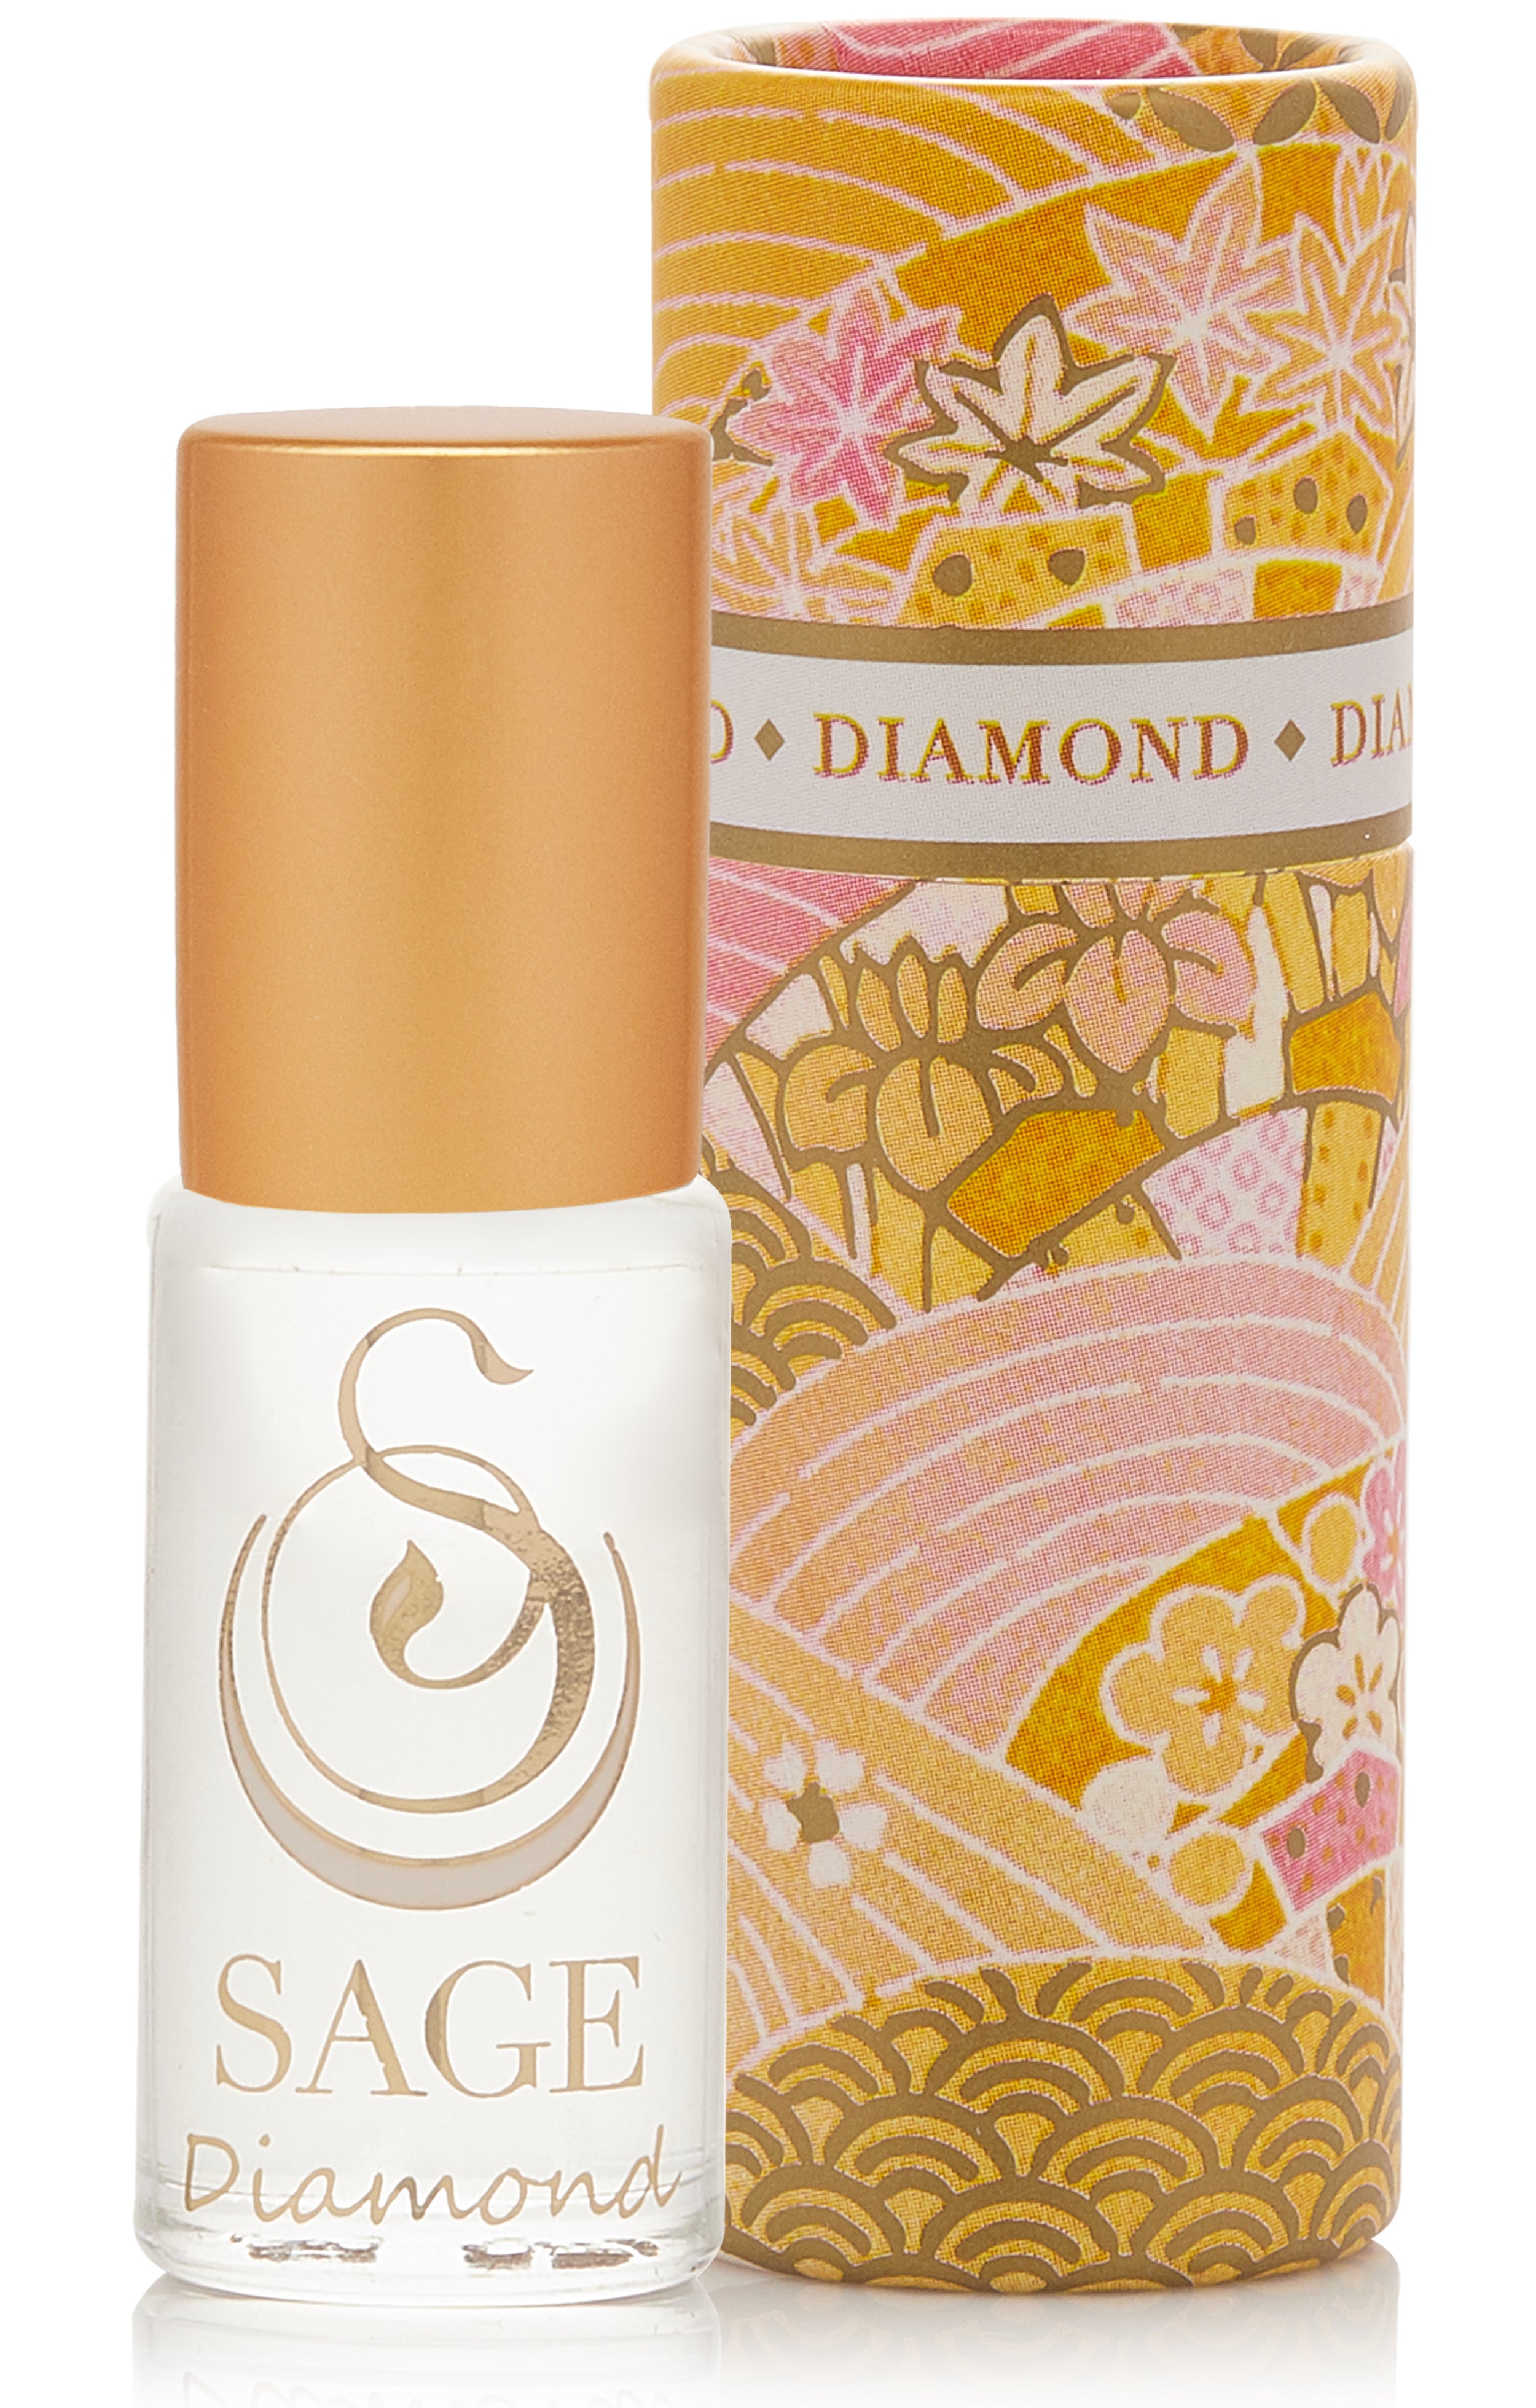 Diamond 1/8 oz Perfume Oil Concentrate Roll-On by Sage